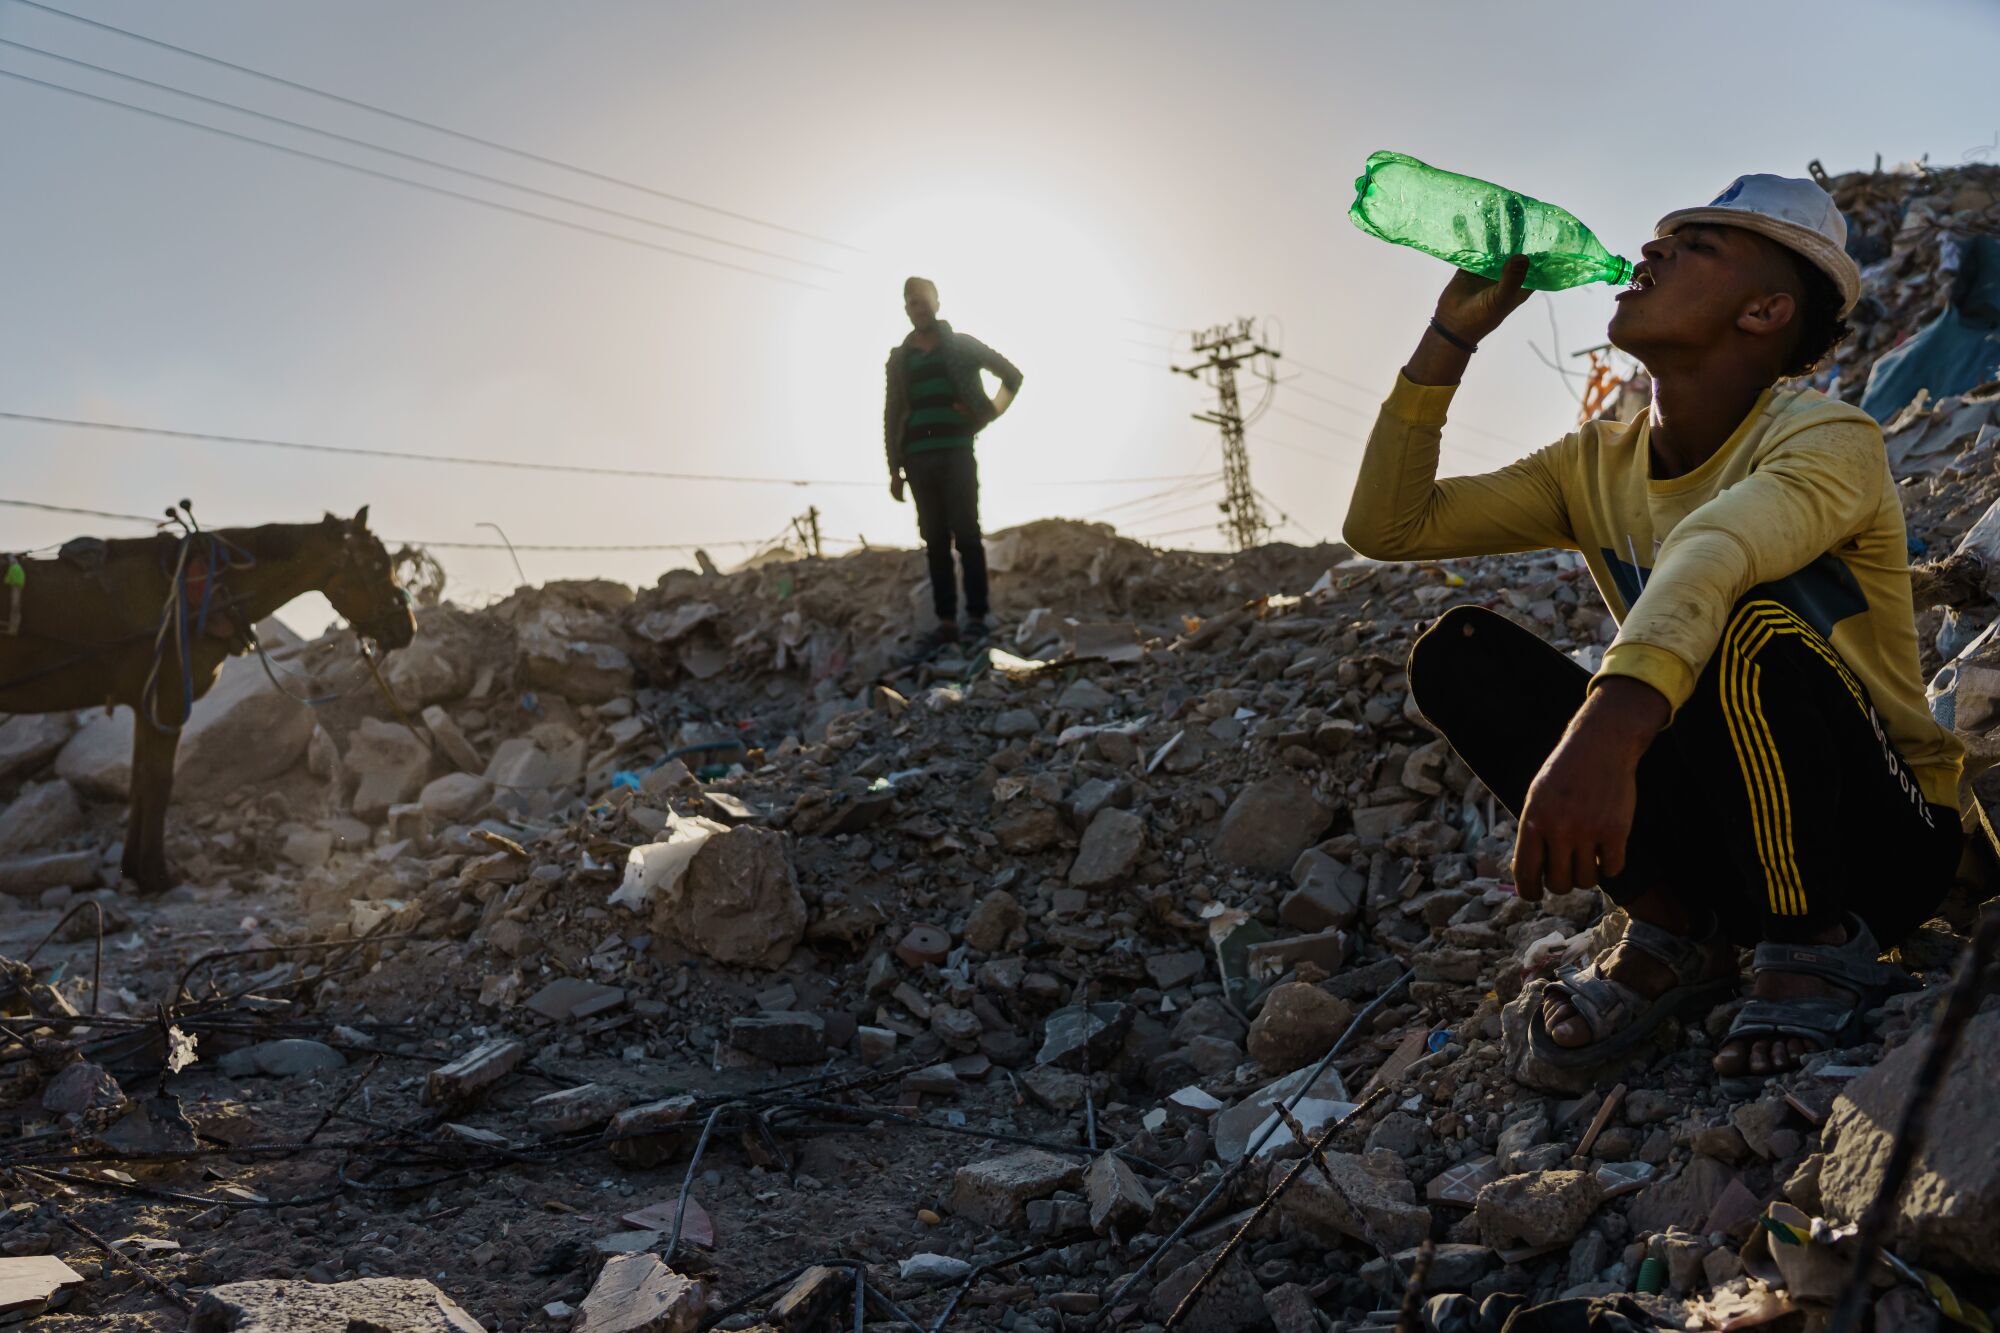  A worker drinks from a bottle during a break on a rubble pile 